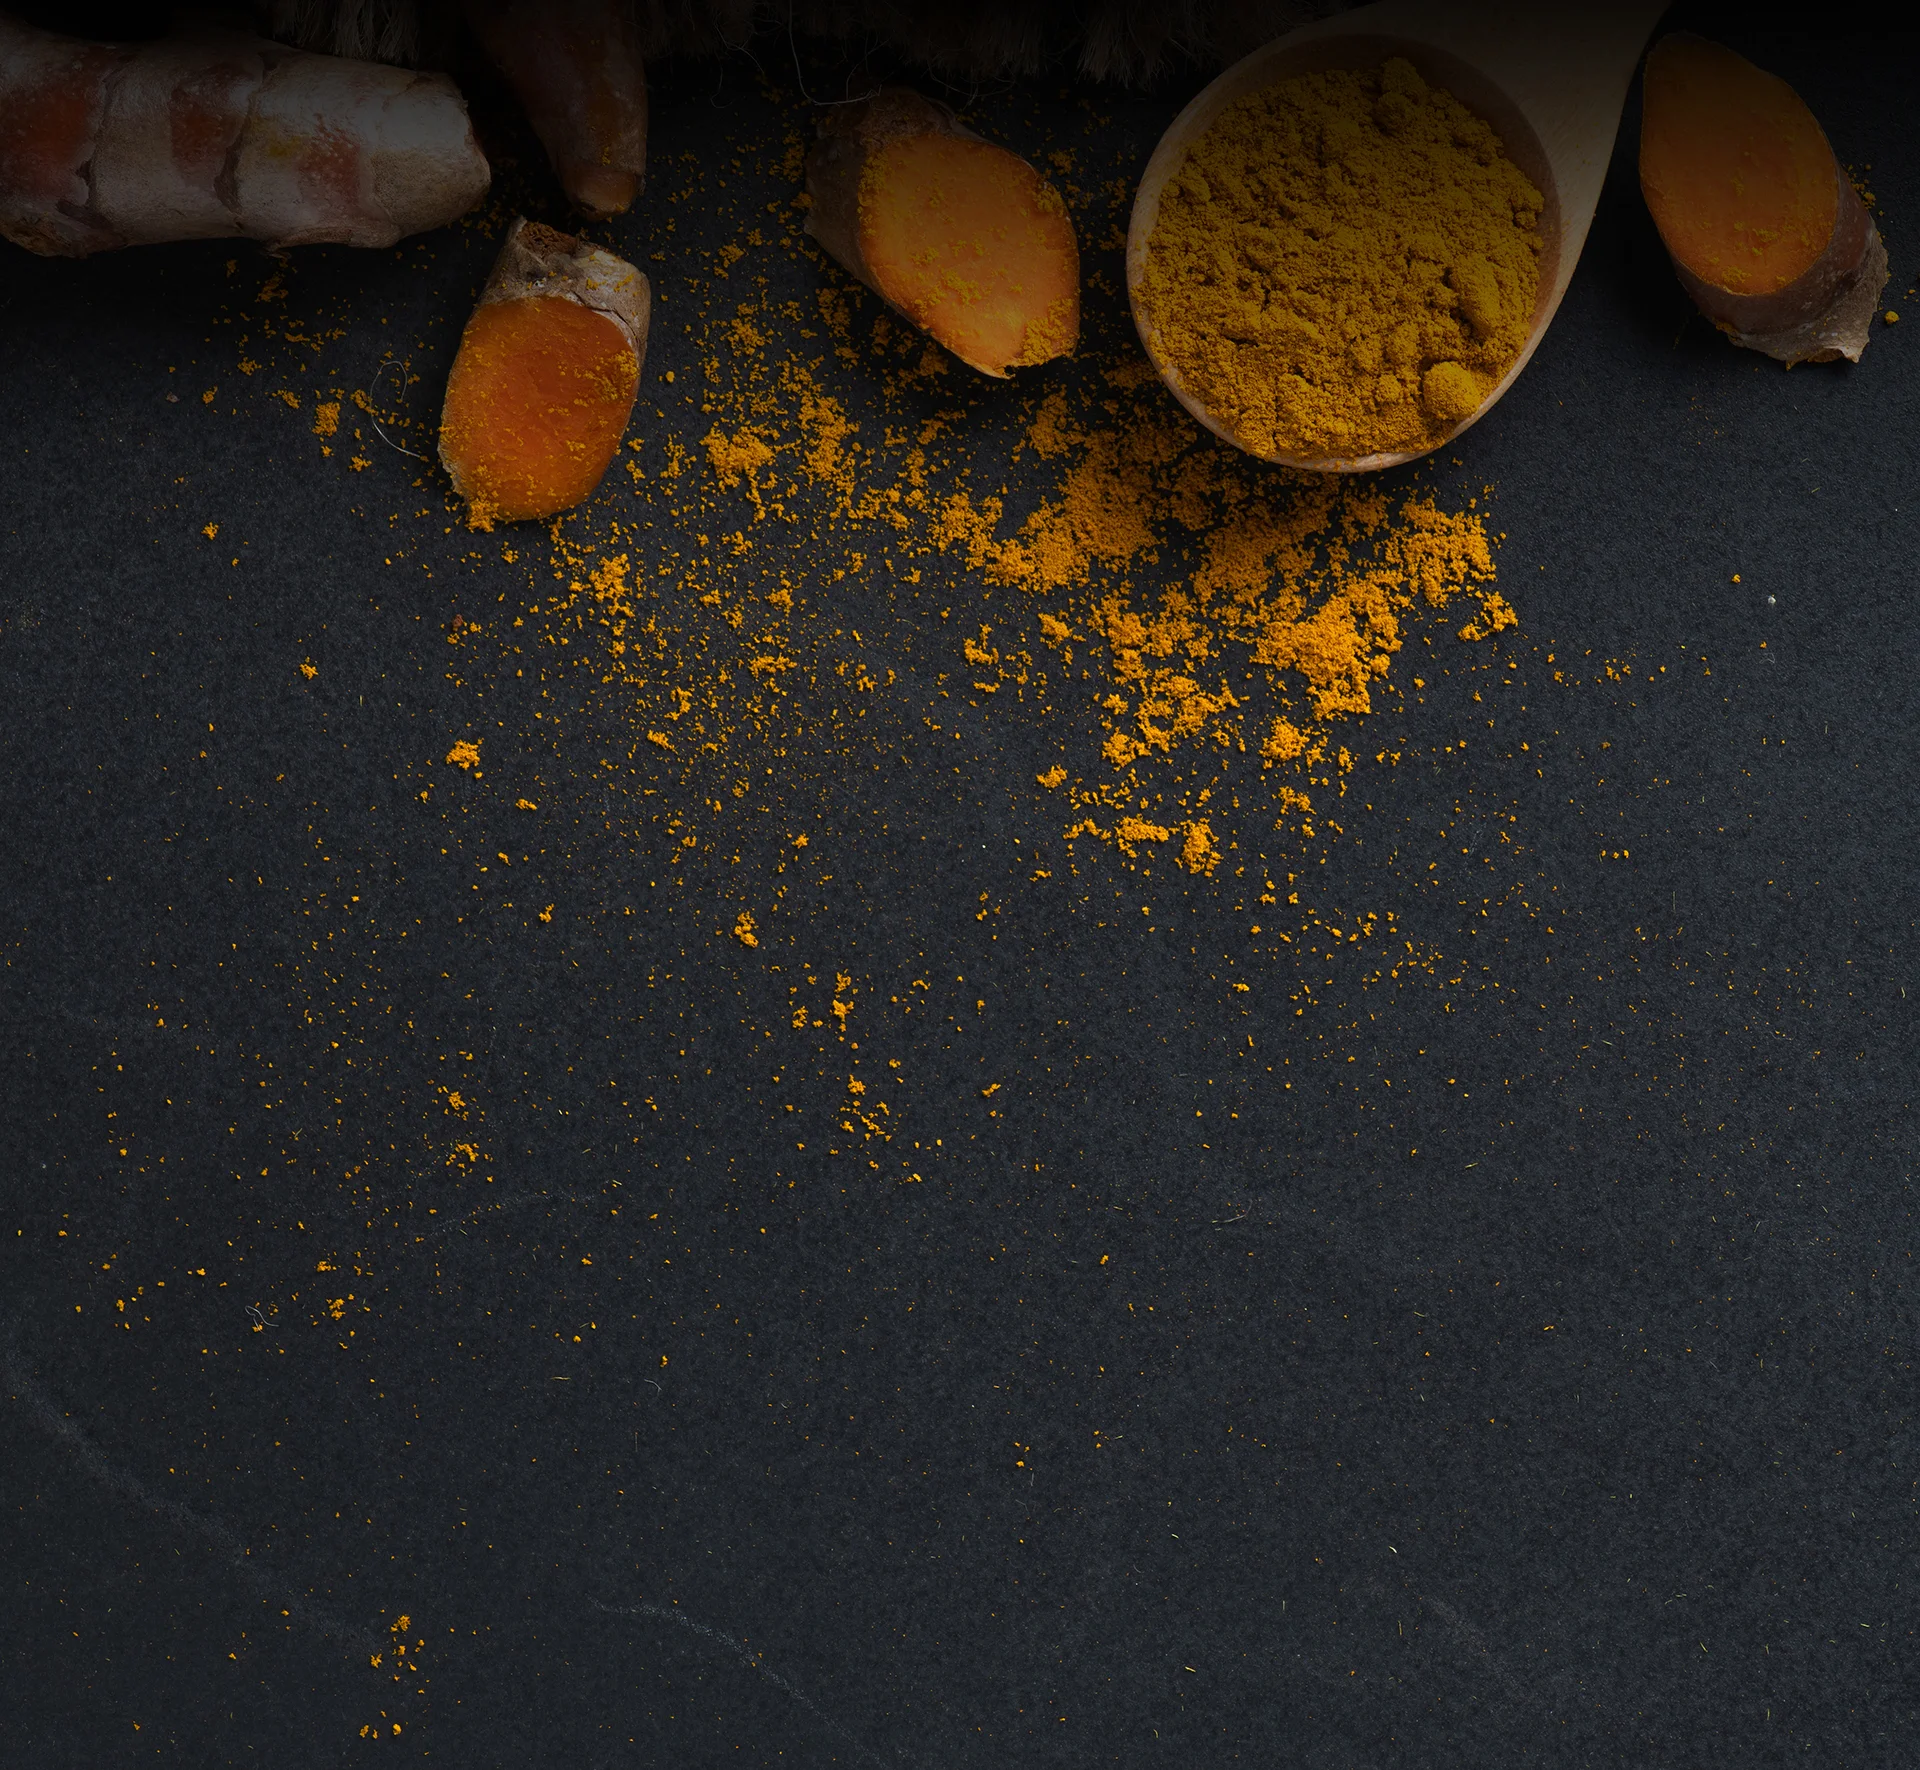  10 Proven Health Benefits of Turmeric and Curcumin by Goodhealth